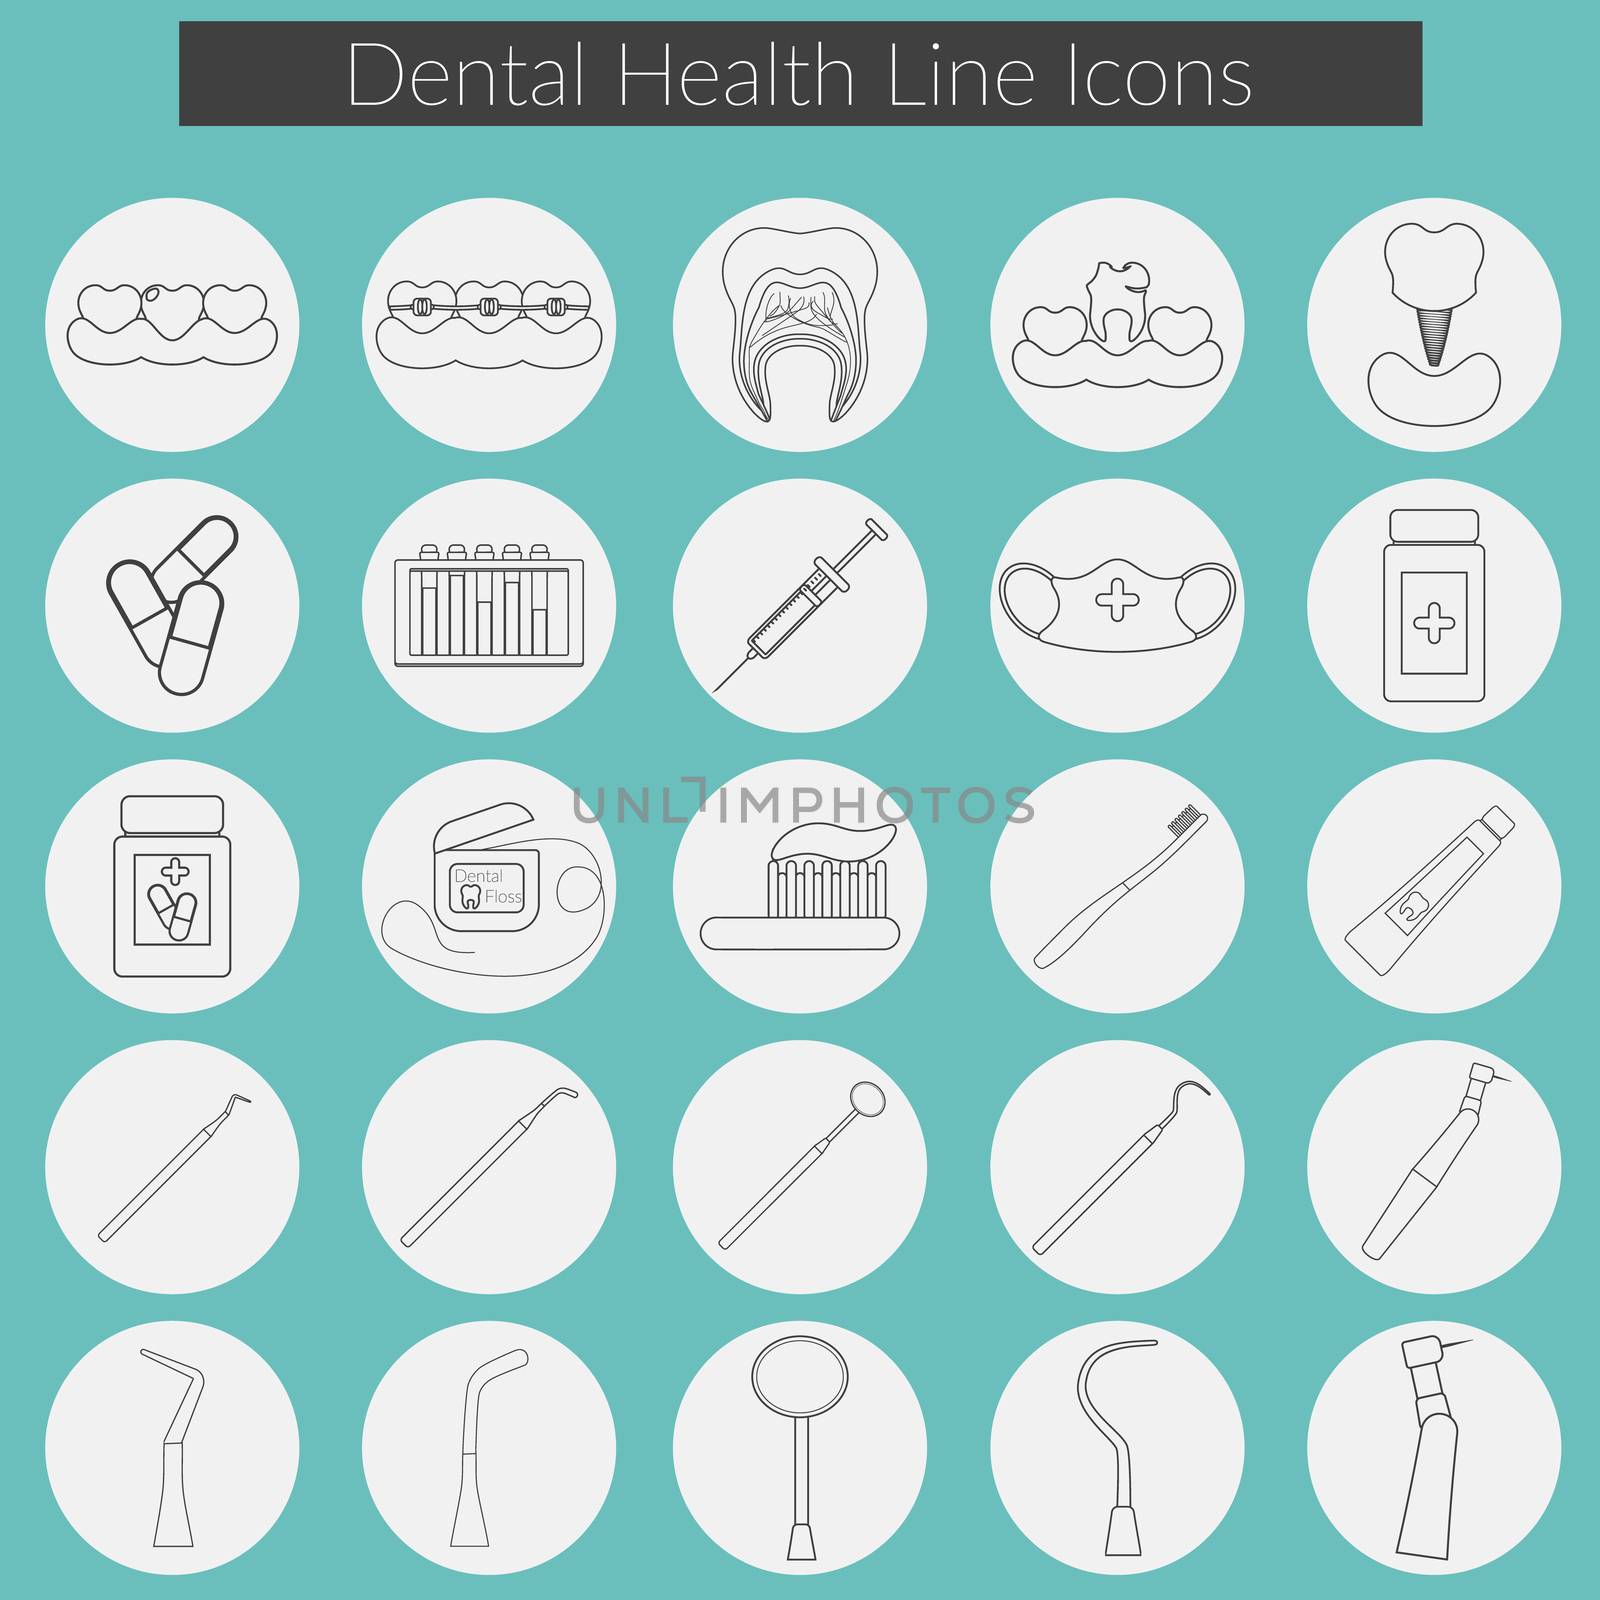 Dental care line icons Vector set with Dental floss, teeth, mouth, tooth paste and brush, medicine, syringe and dentist instruments.